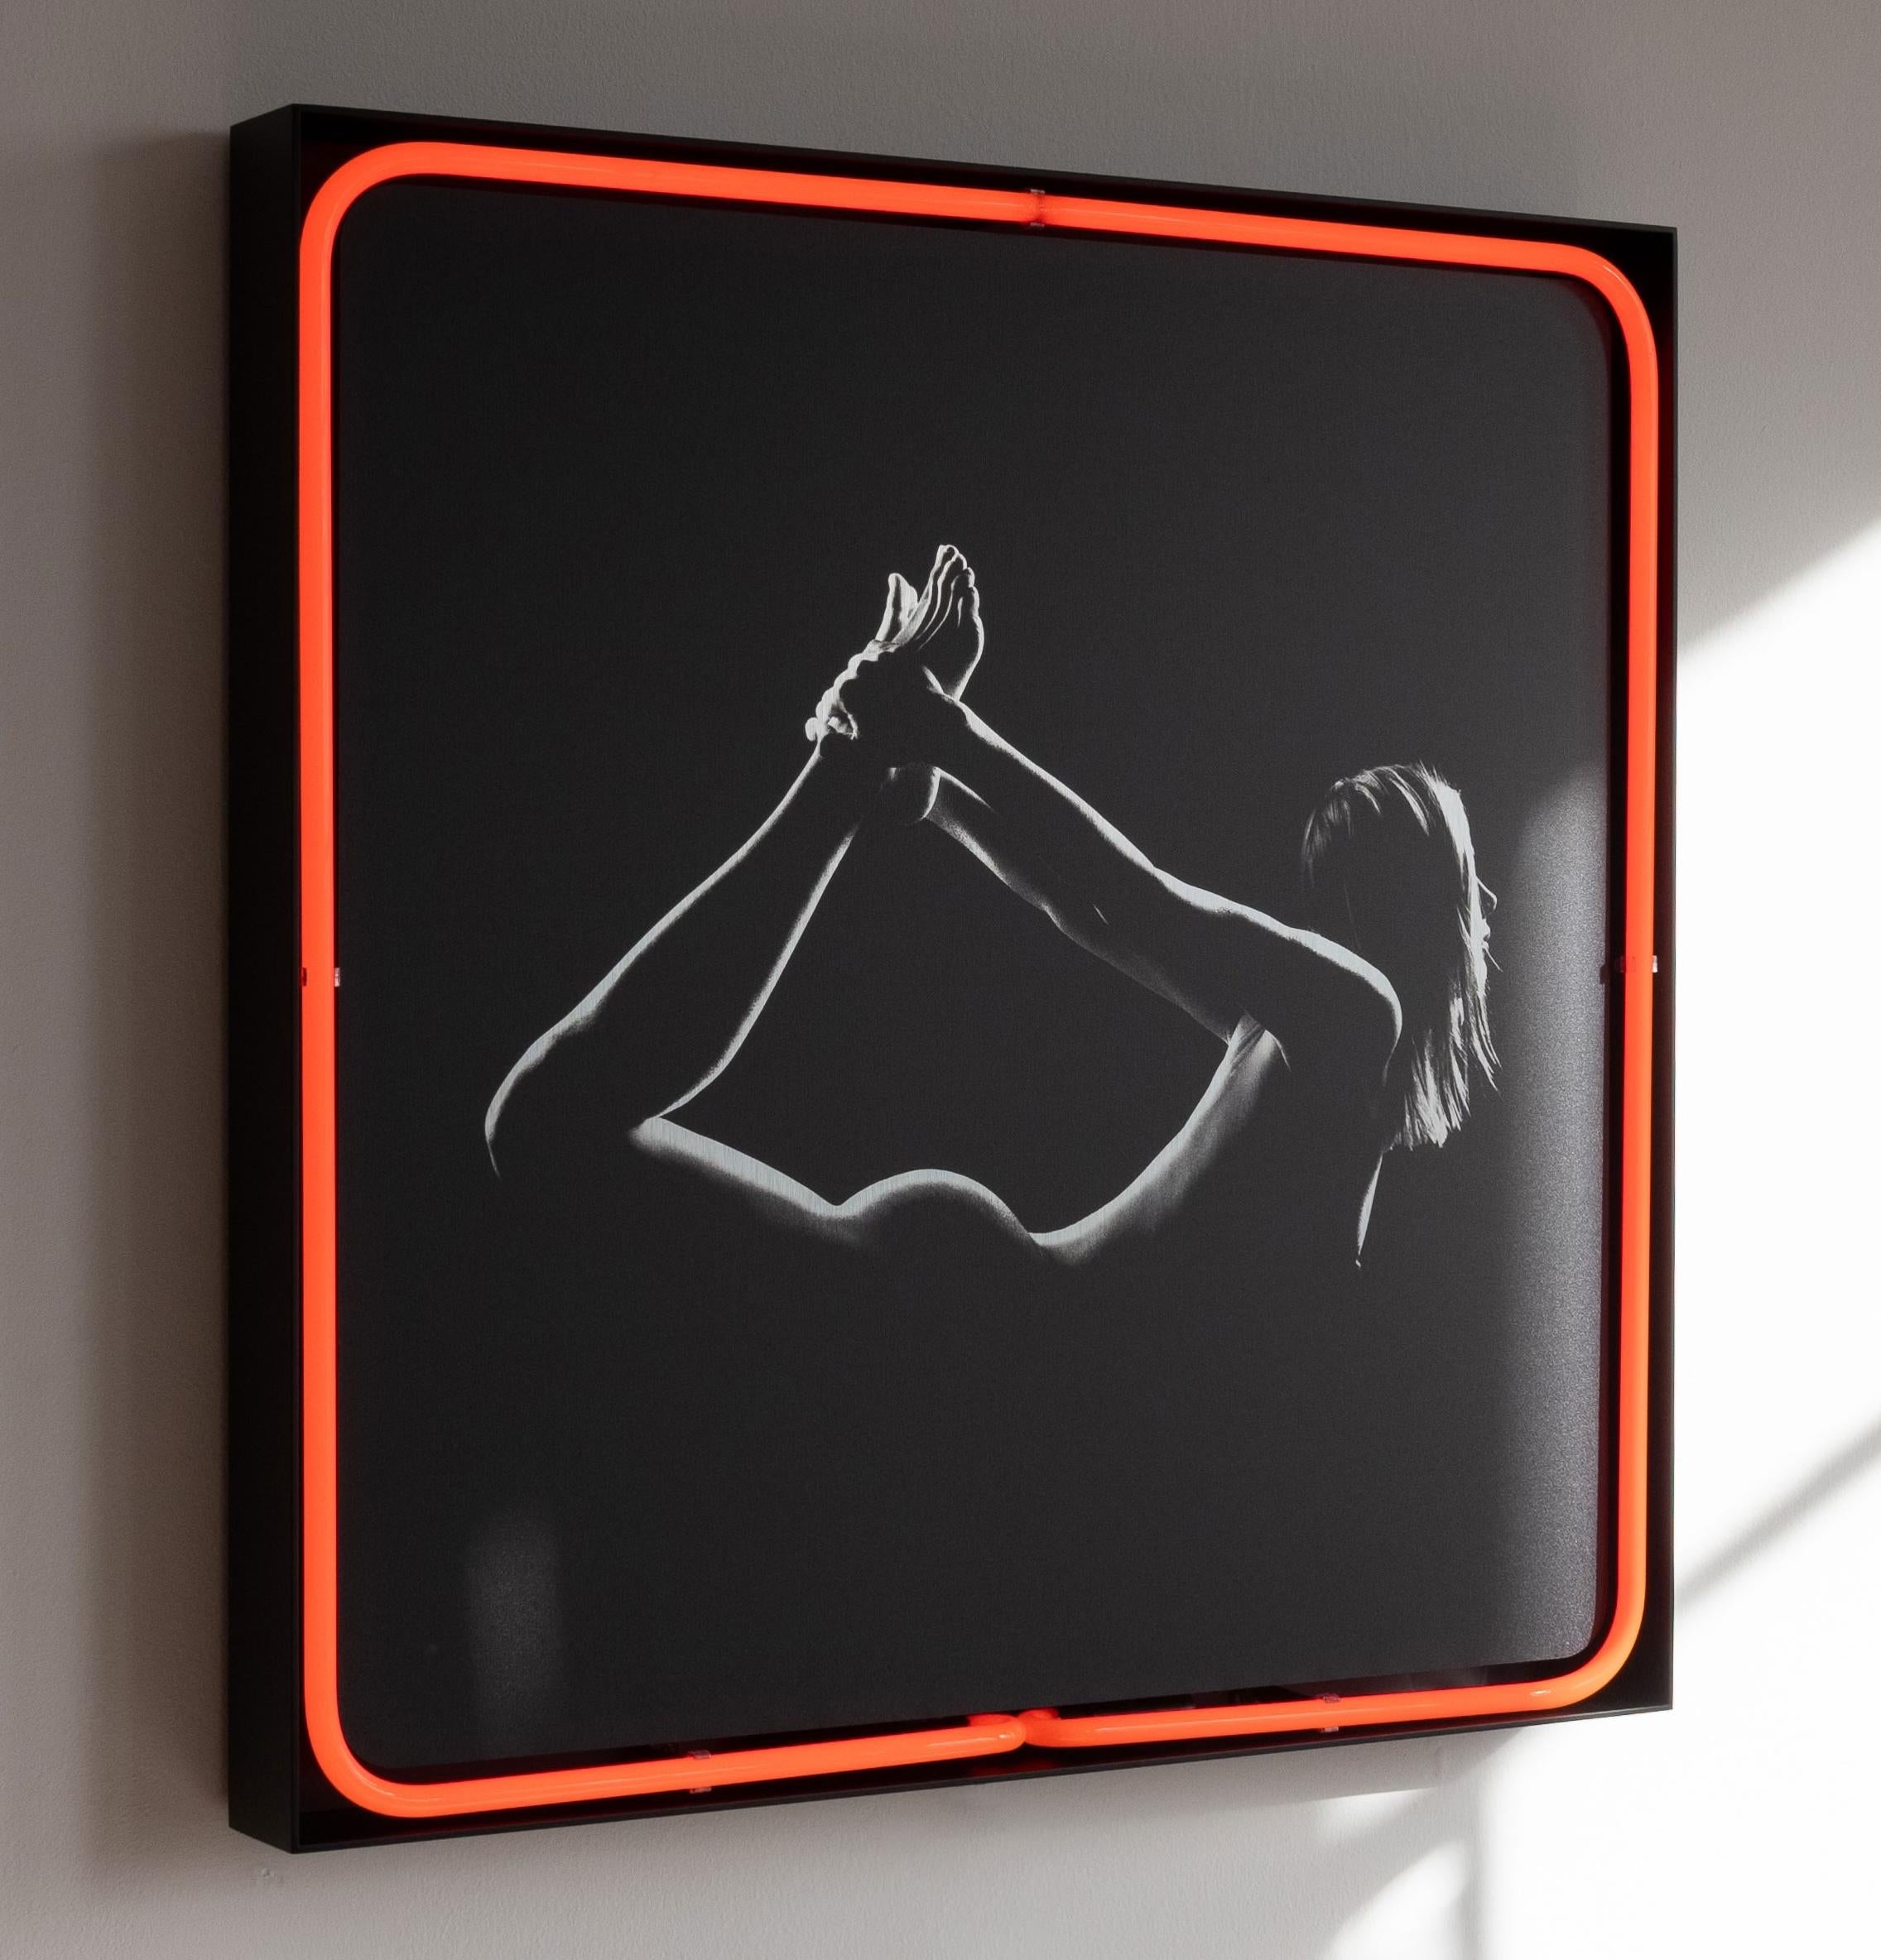 "Sacral Chakra" Mixed media photography 26" x 26" inch Edition 1/7 by Oleg Char

Medium: UV print on Aluminum Dibond, glass neon, wood backing, metal frame.

Sacral Chakra - Svadhishthana 

The sacral chakra holds a sacred space for our spiritual